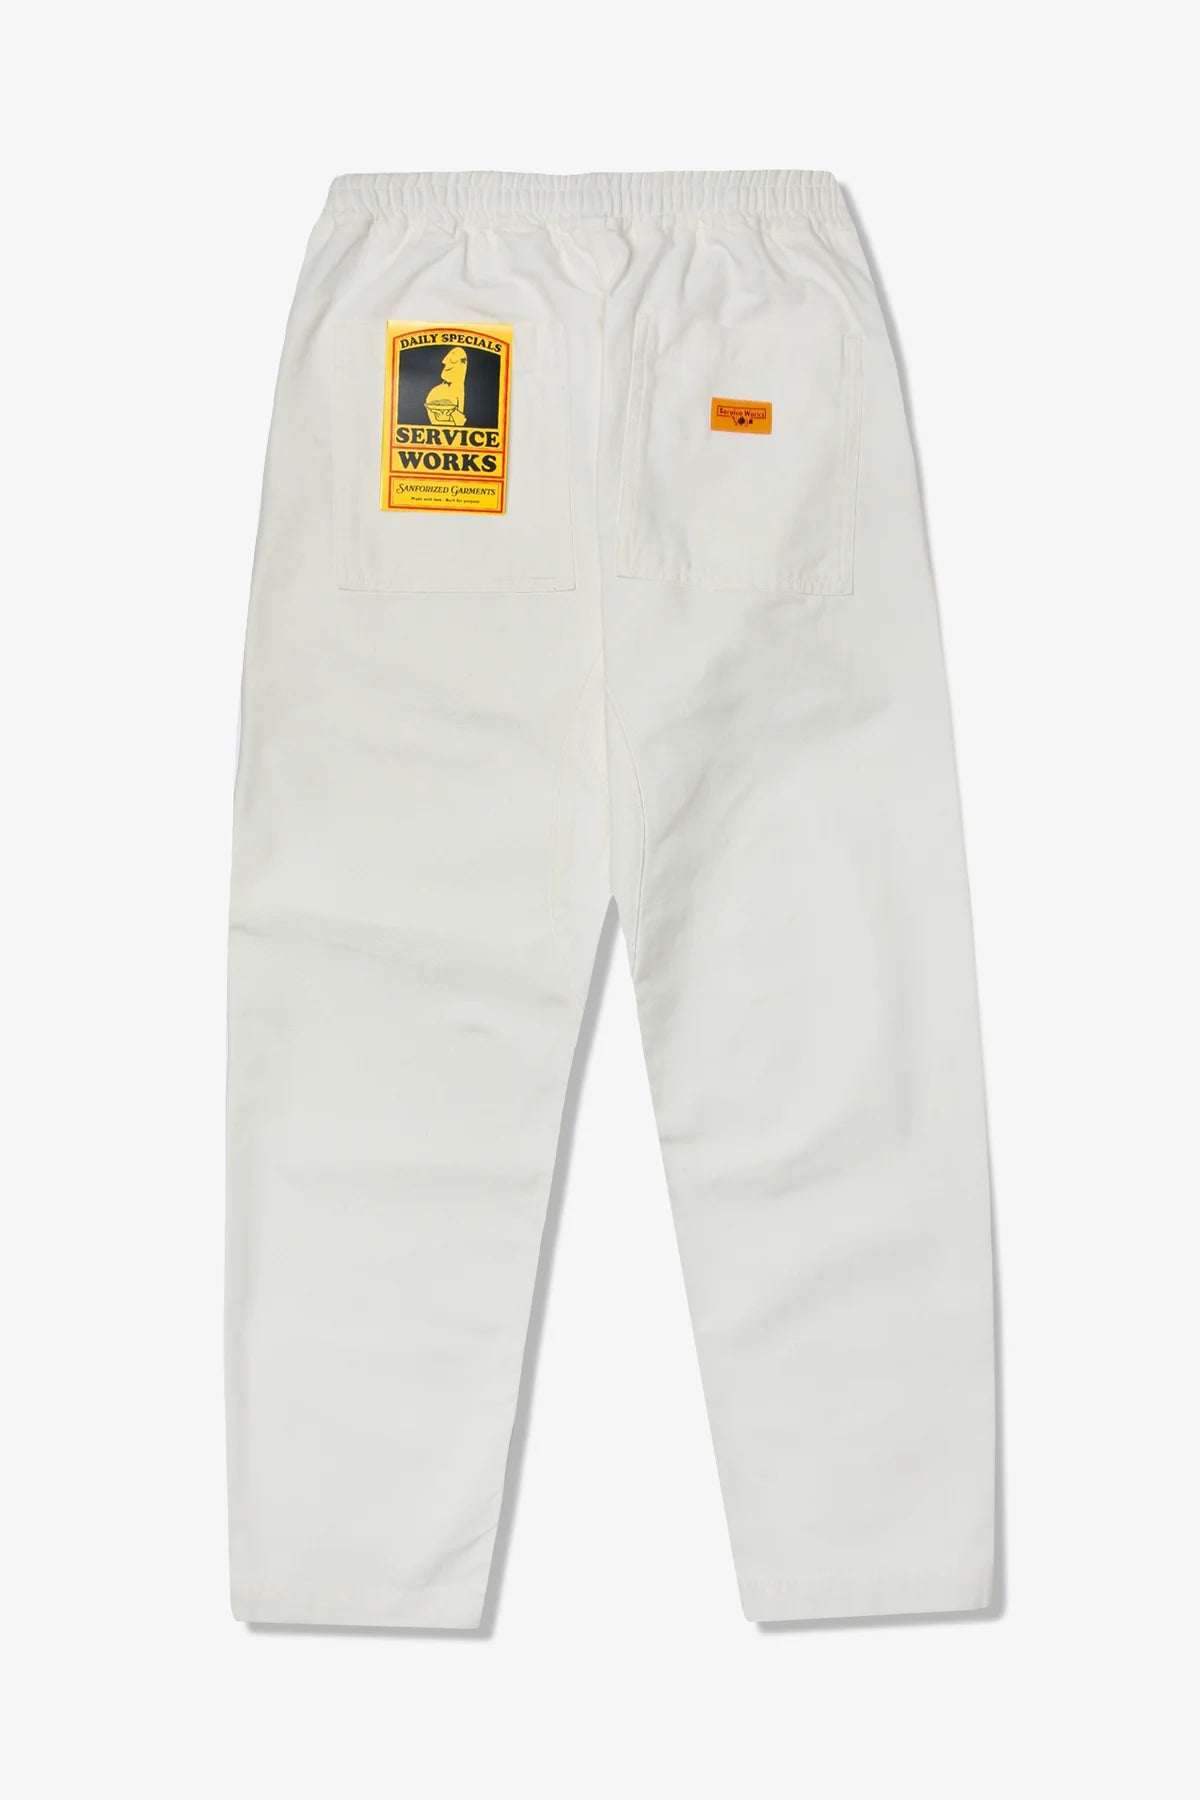 Pantalones Service Works Classic Chef Off White